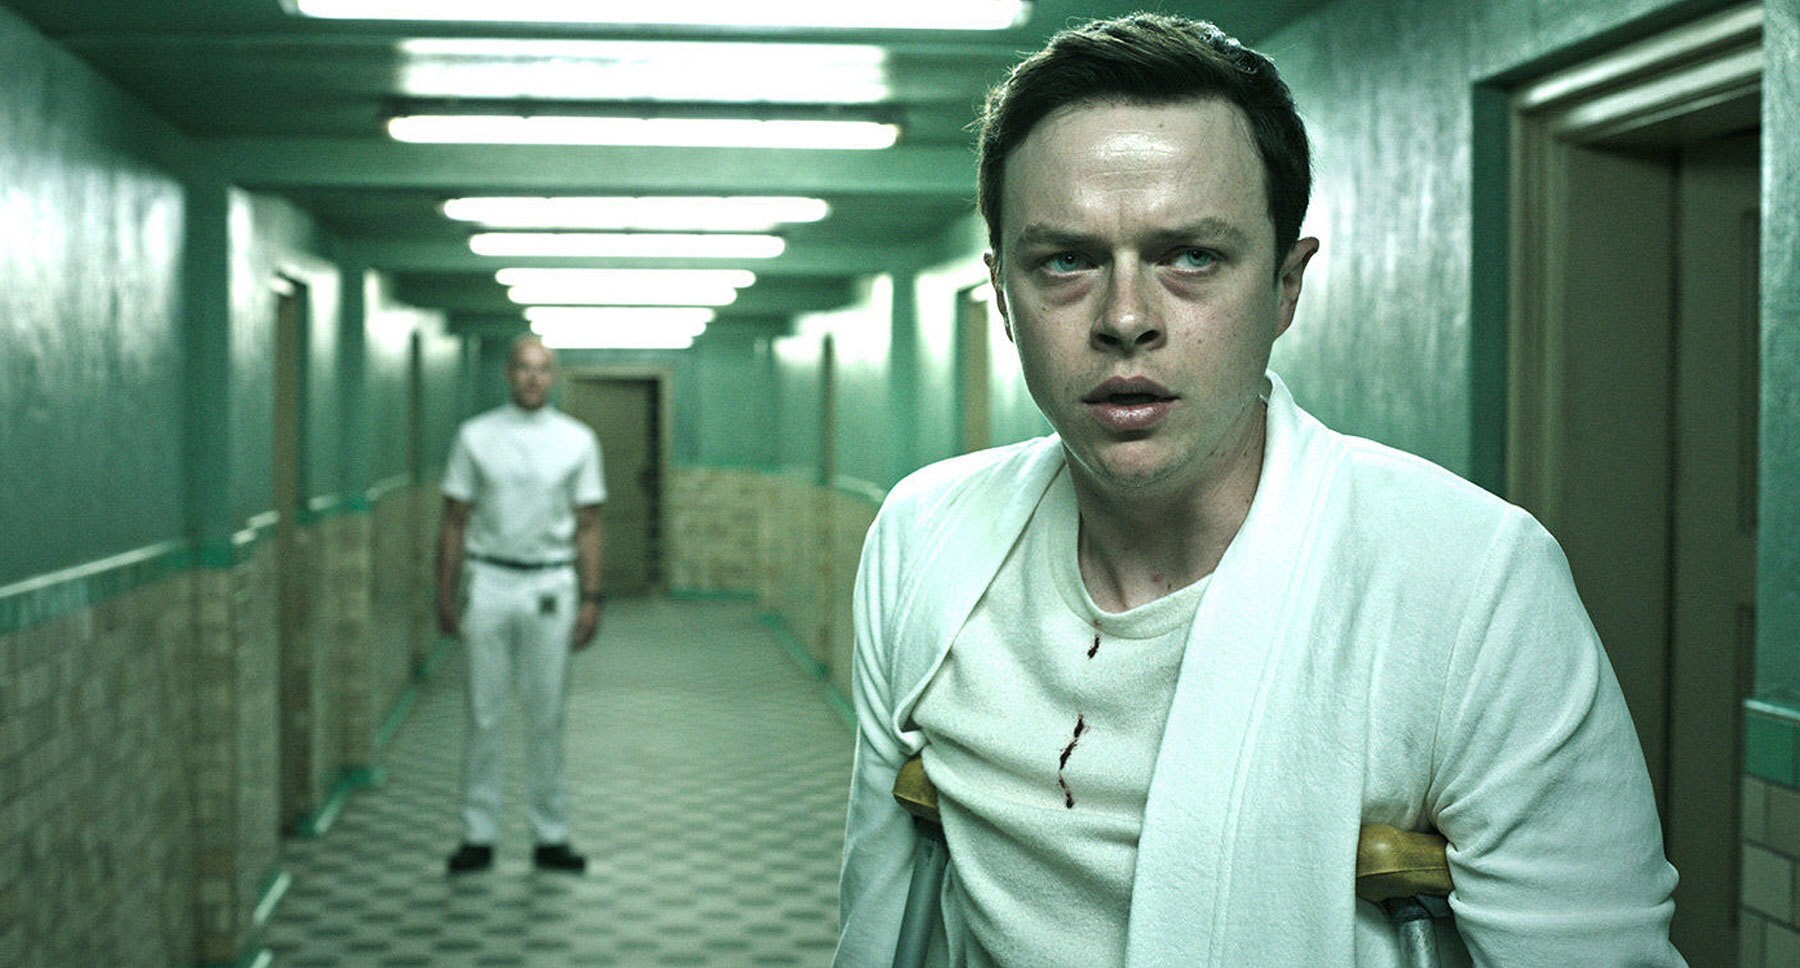 Actor Dane DeHaan (Lockhart) with a character watching him in the film "A Cure for Wellness"